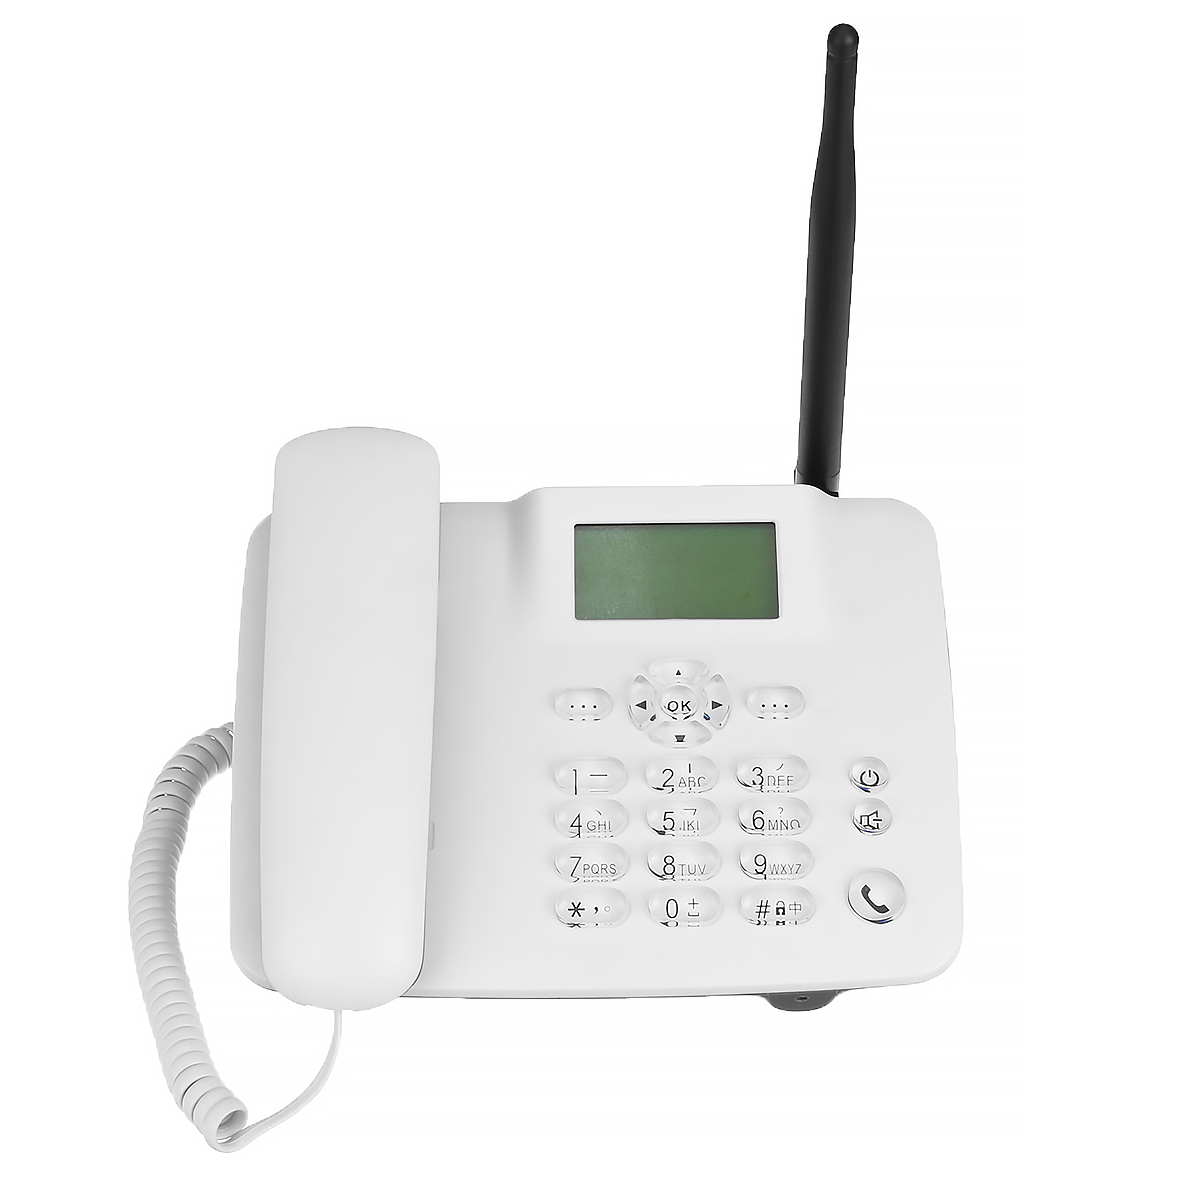 Find Telephone Call Phone SIM Card GSM Wireless Fixed Terminal Alarm Home Office Feature Phone for Sale on Gipsybee.com with cryptocurrencies